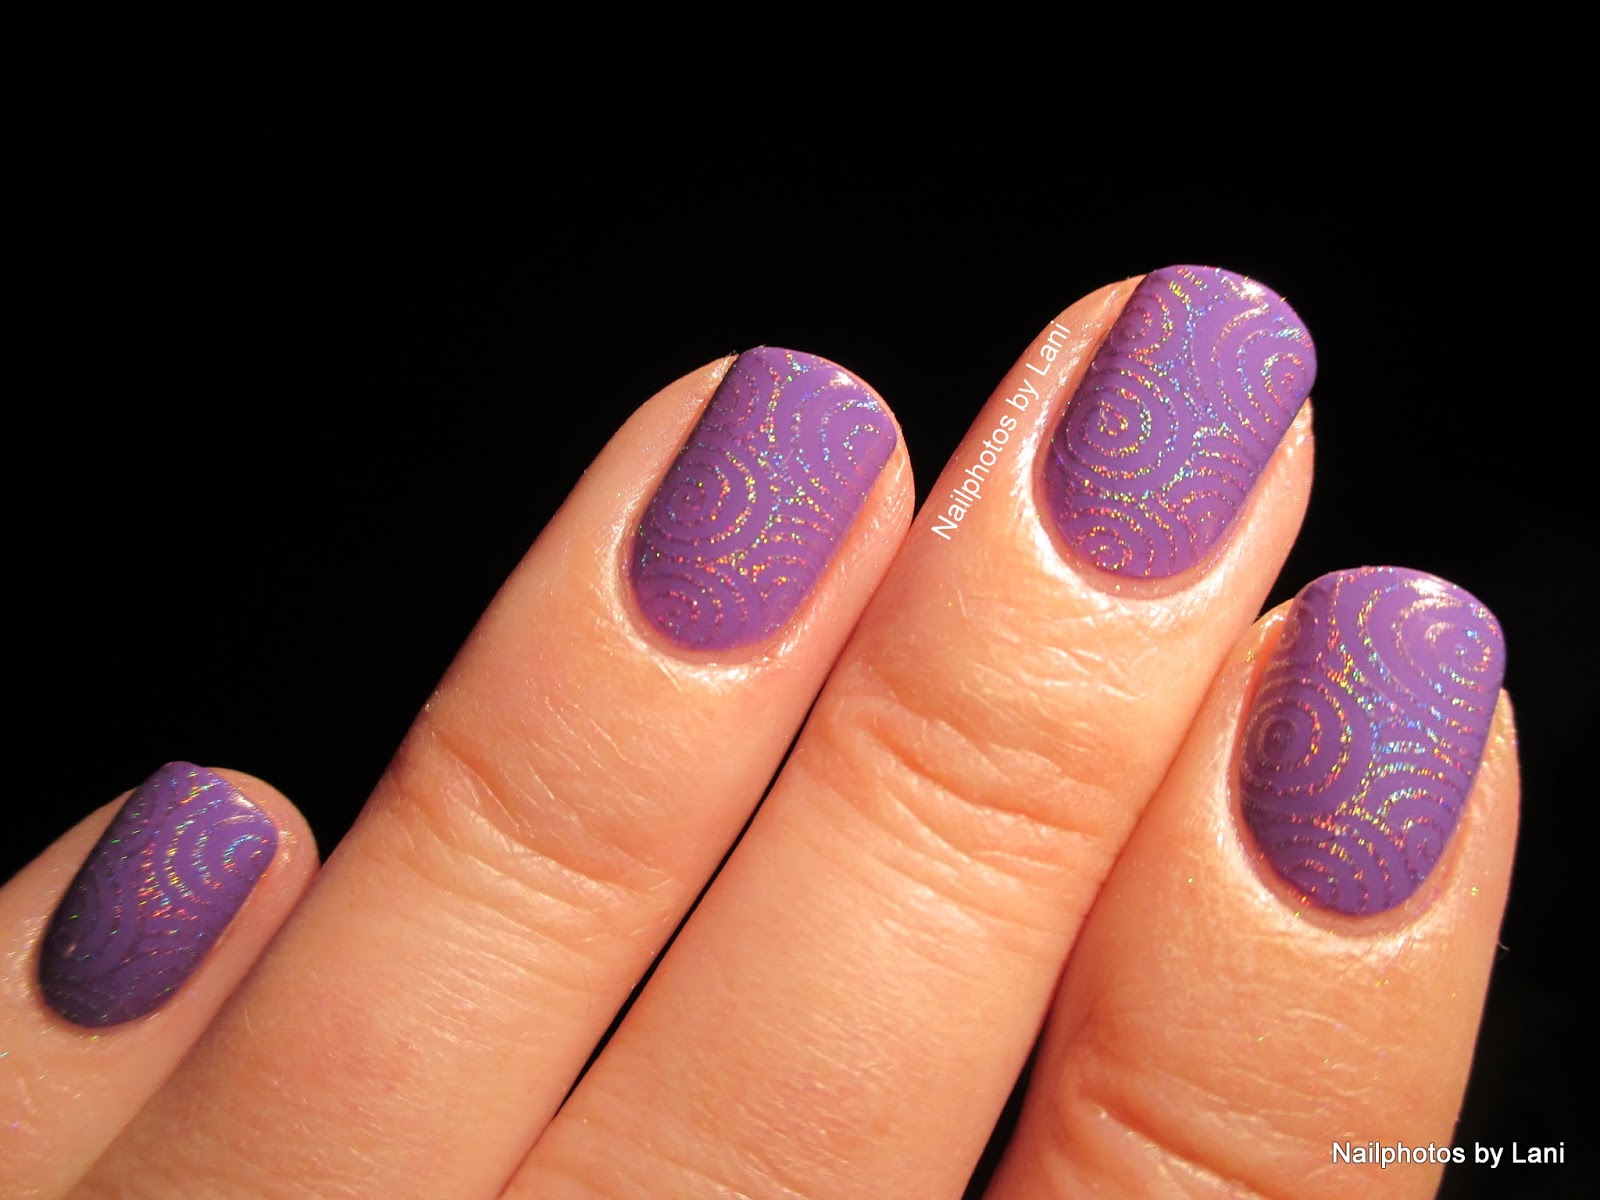 4. Radiant Orchid Nail Varnish - wide 2